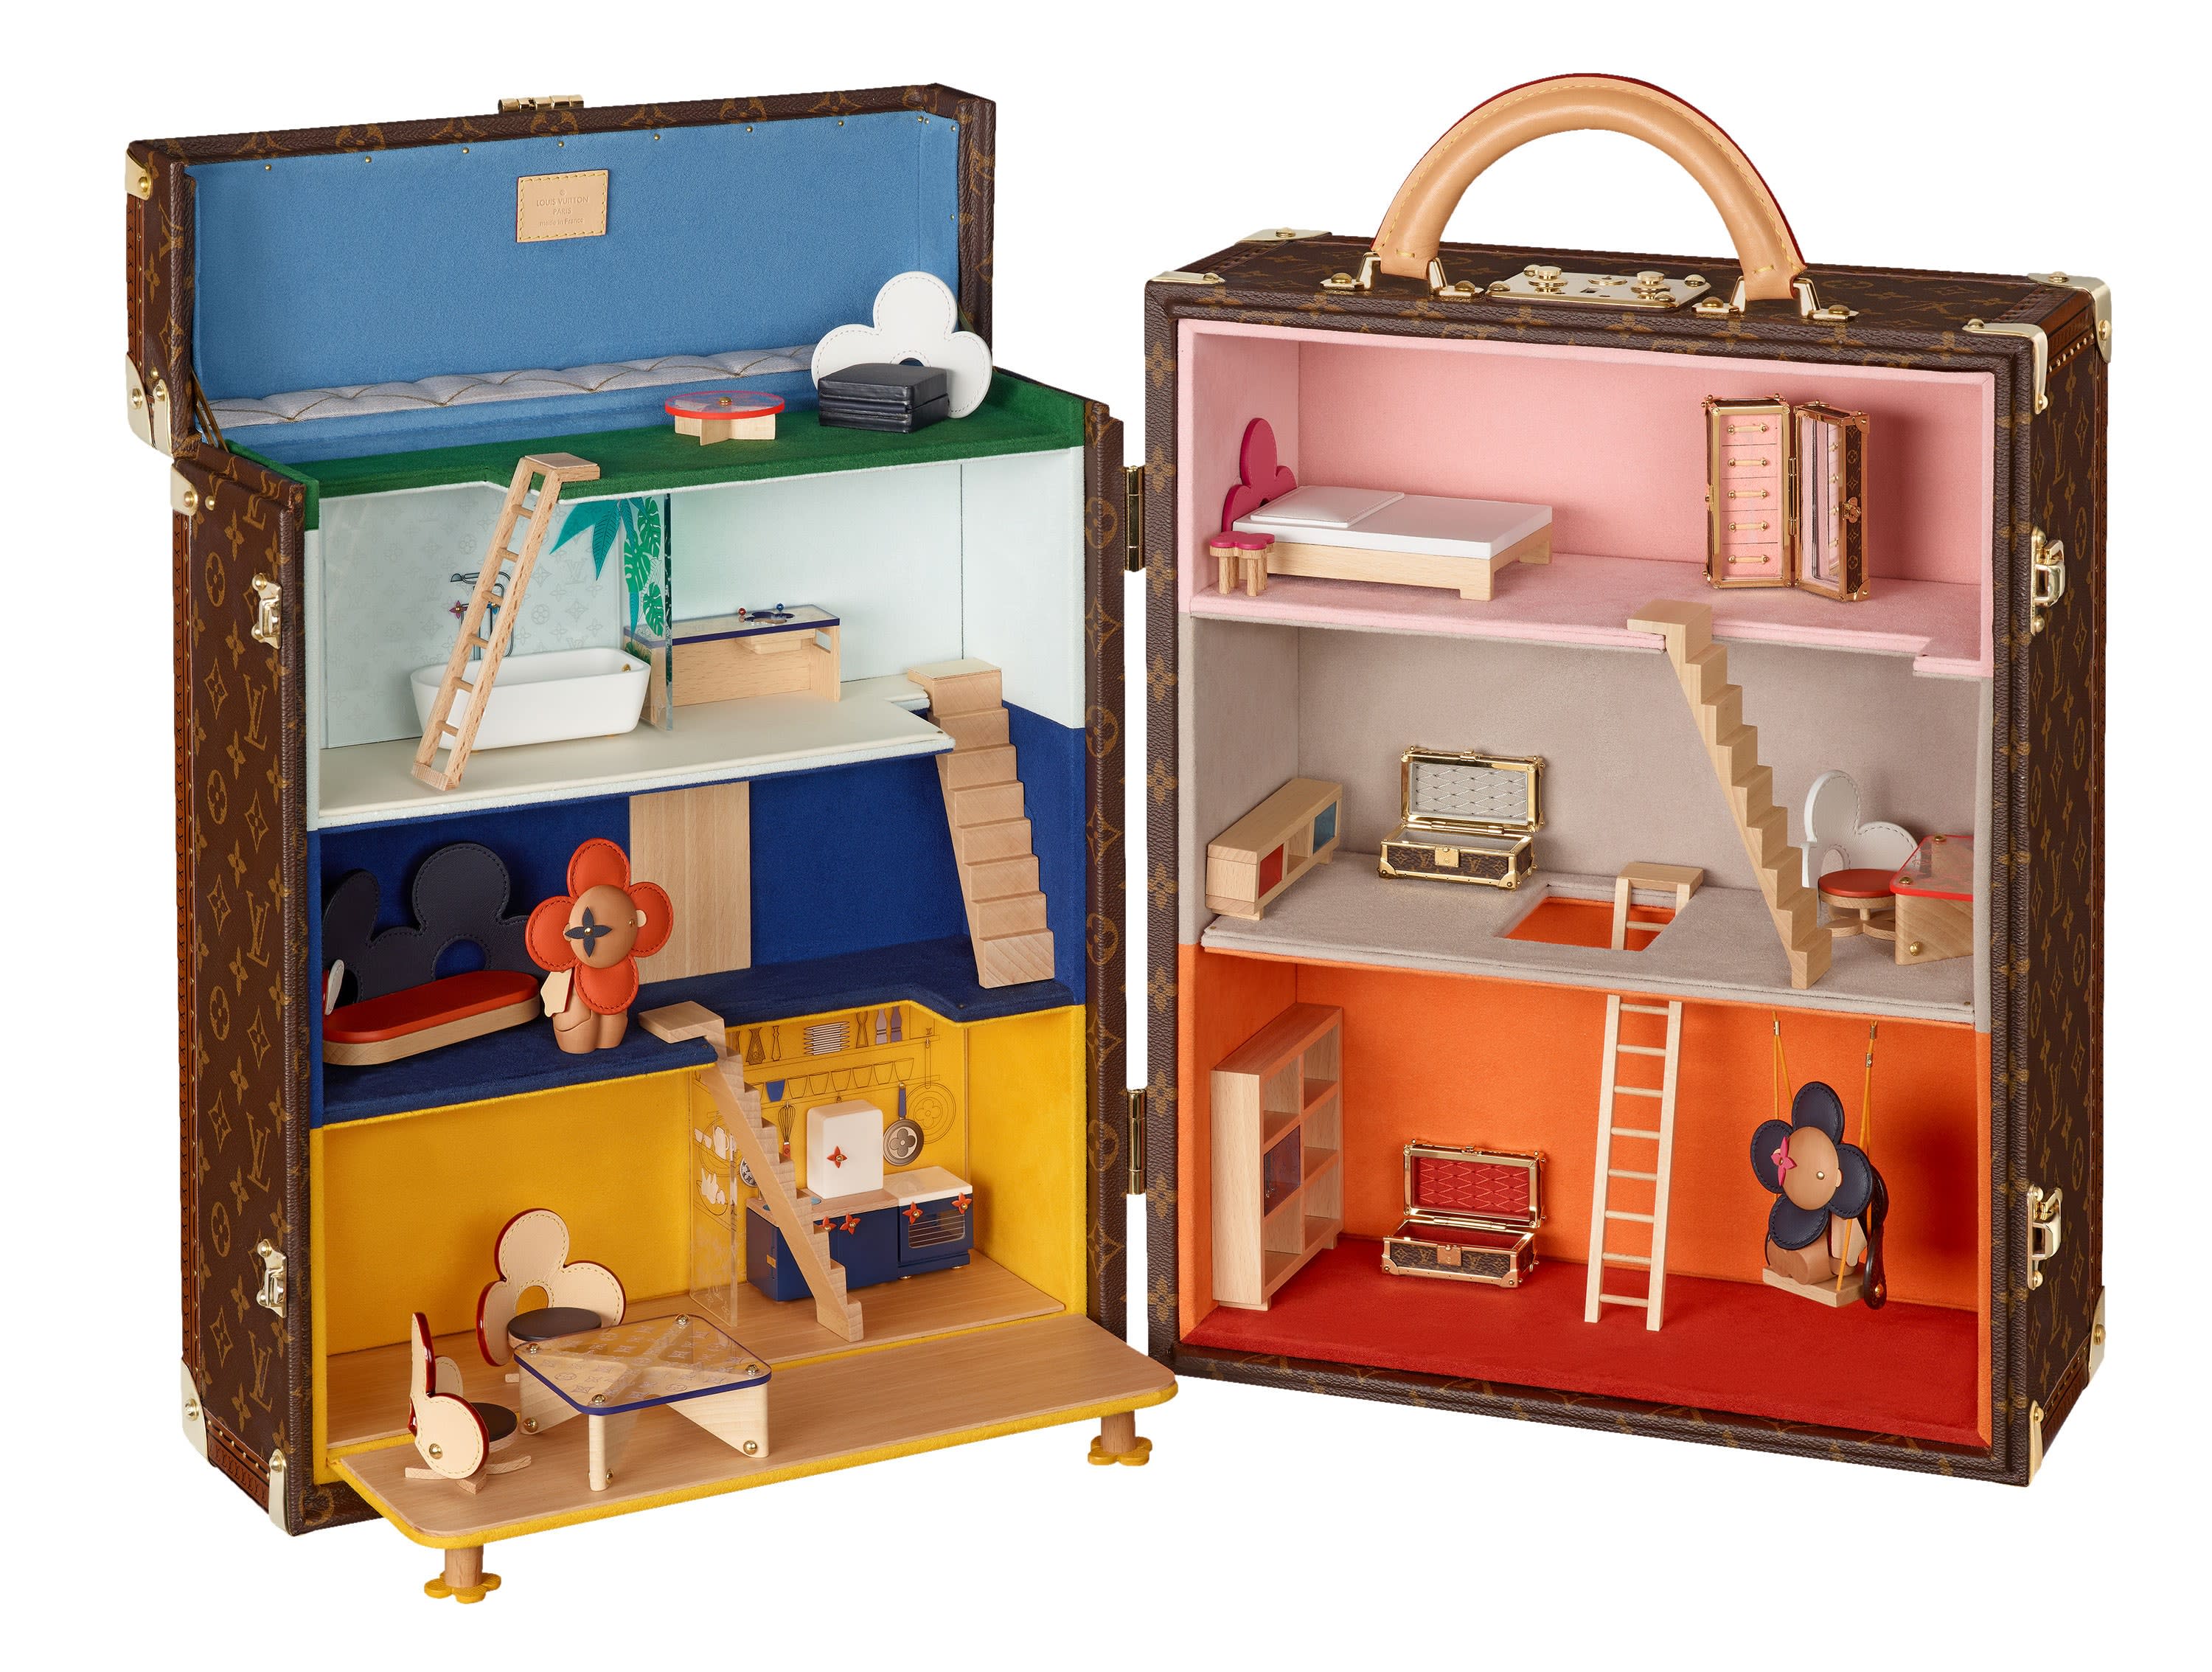 Louis Vuitton Debuts New Dollhouse Enclosed Within Their Signature Monogrammed Canvas Trunk